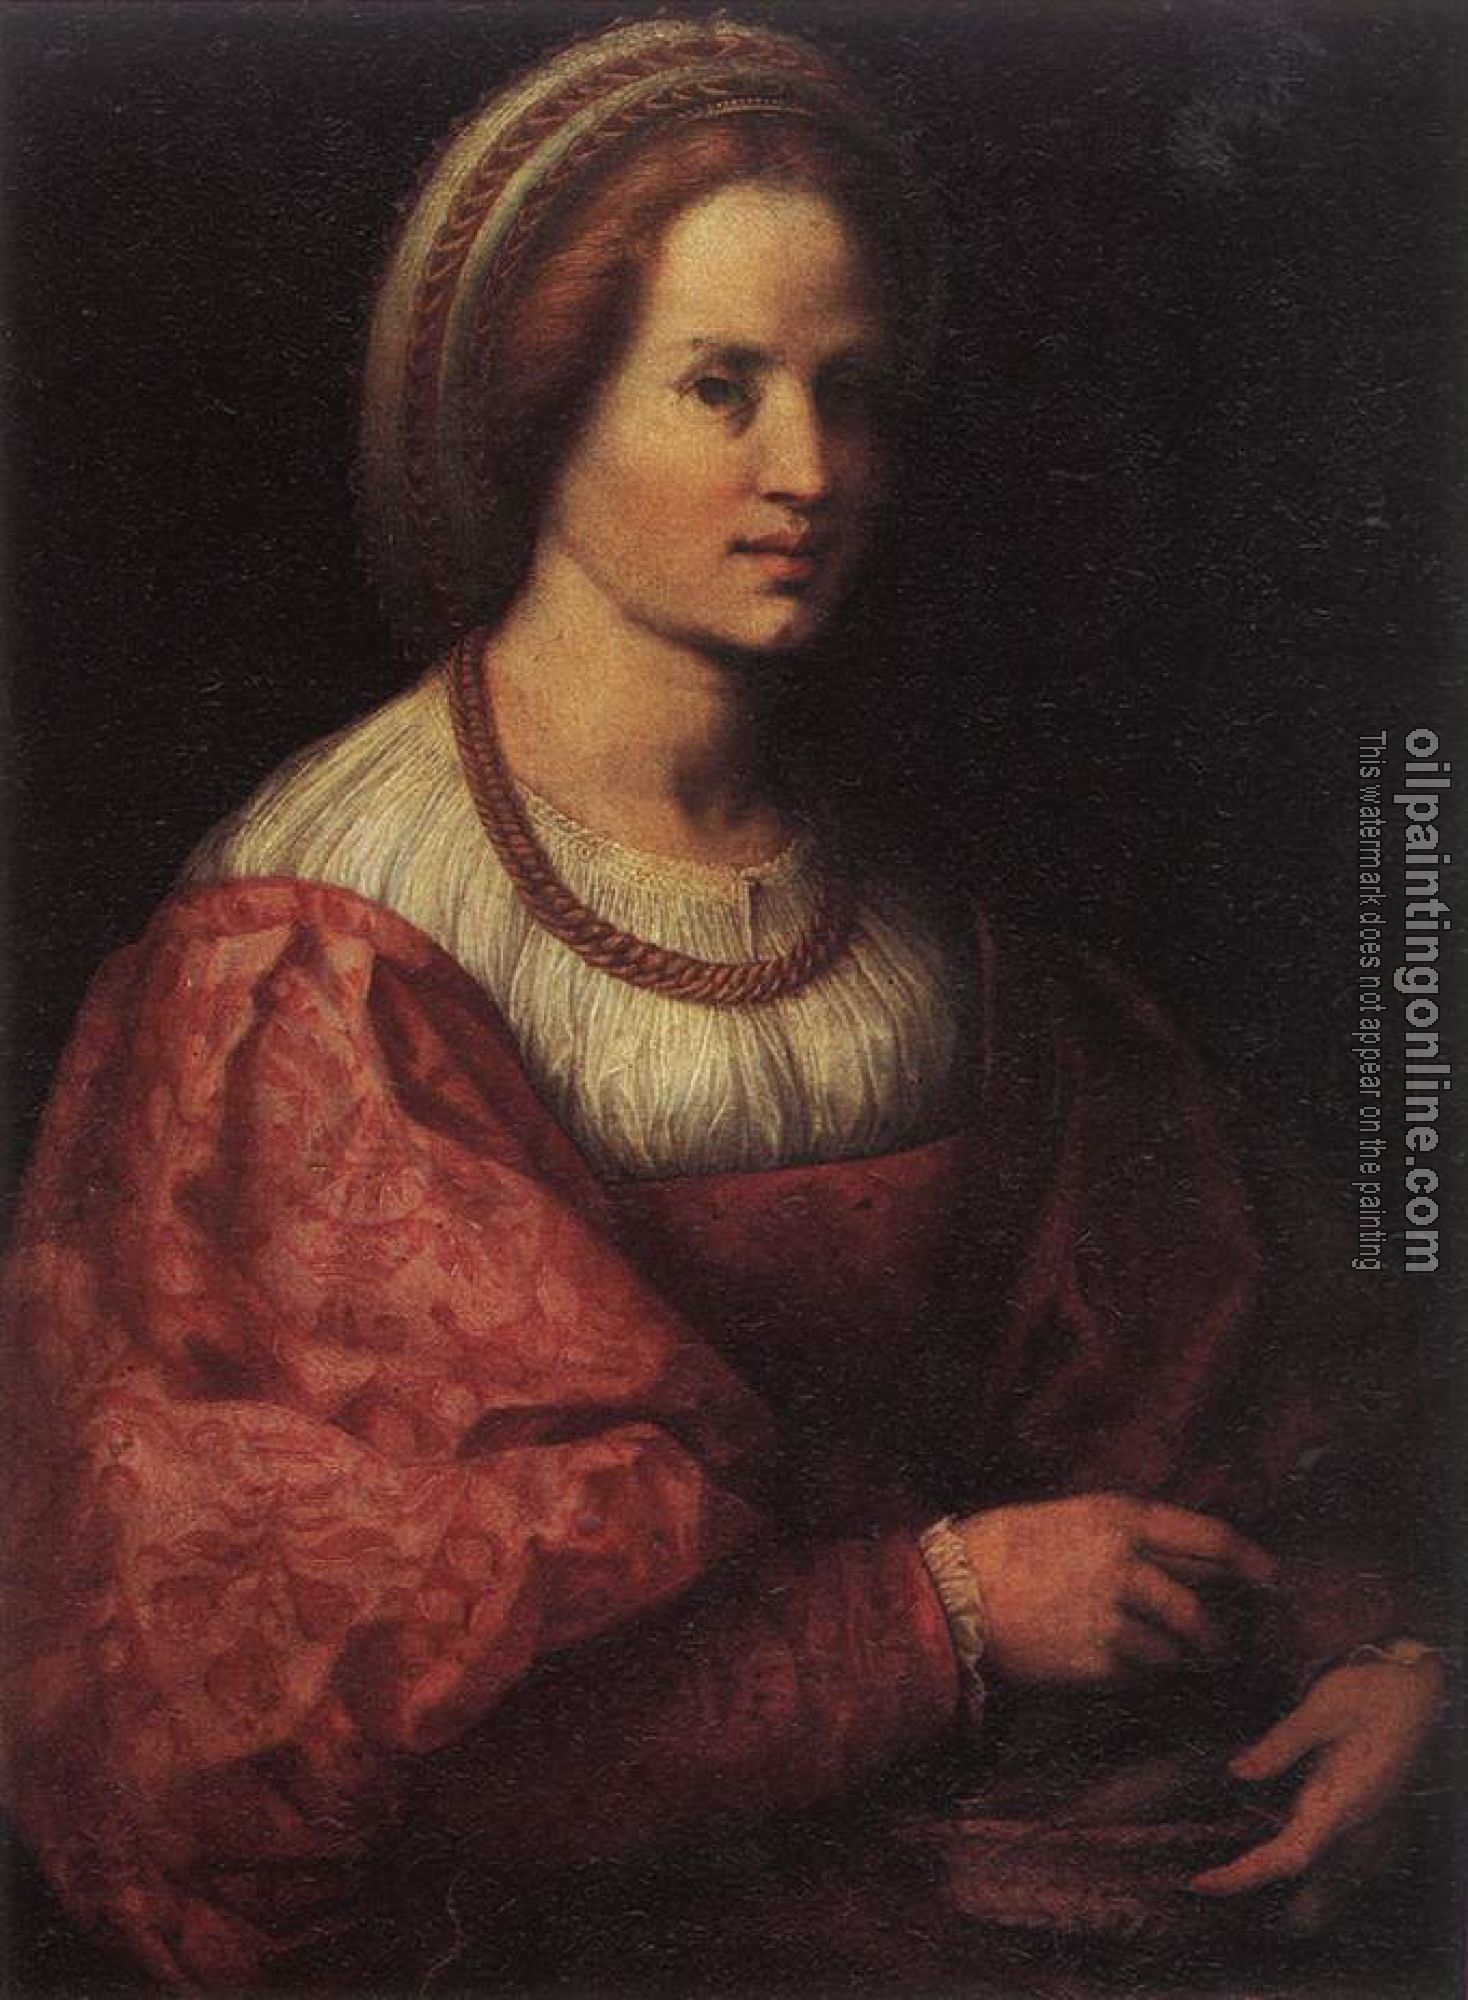 Andrea del Sarto - Portrait of a Woman with a Basket of Spindles